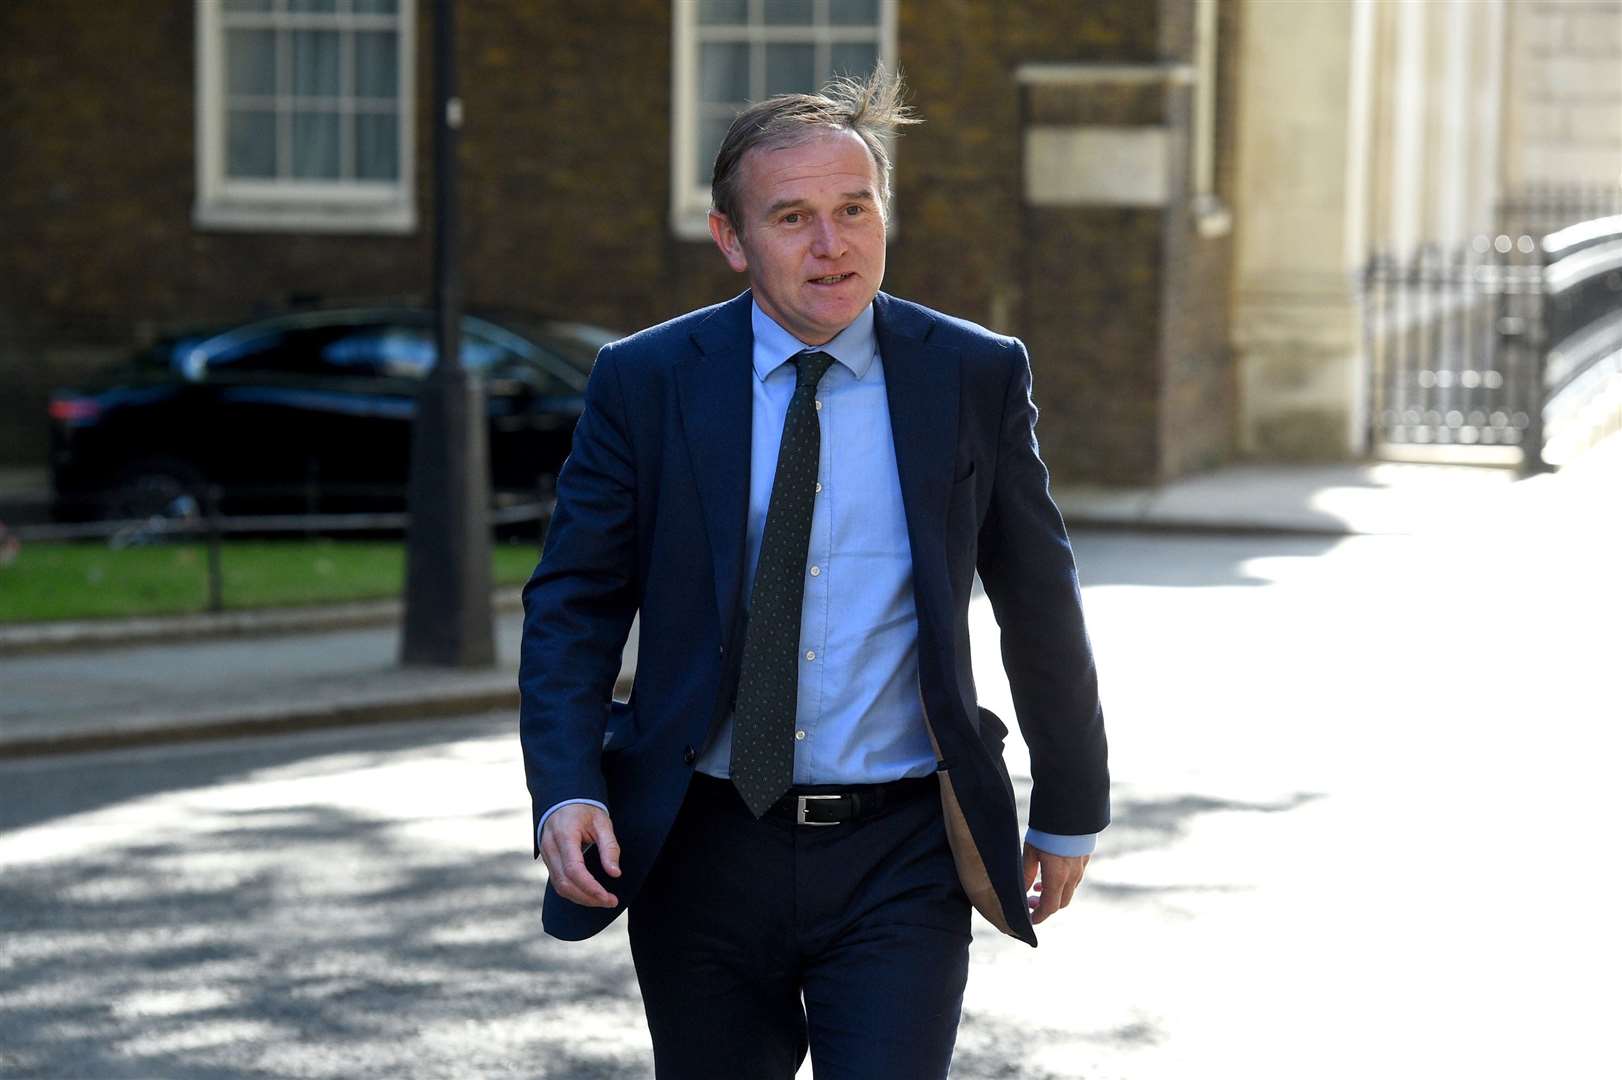 Environment secretary George Eustice. Pictures: Kirsty O’Connor/PA